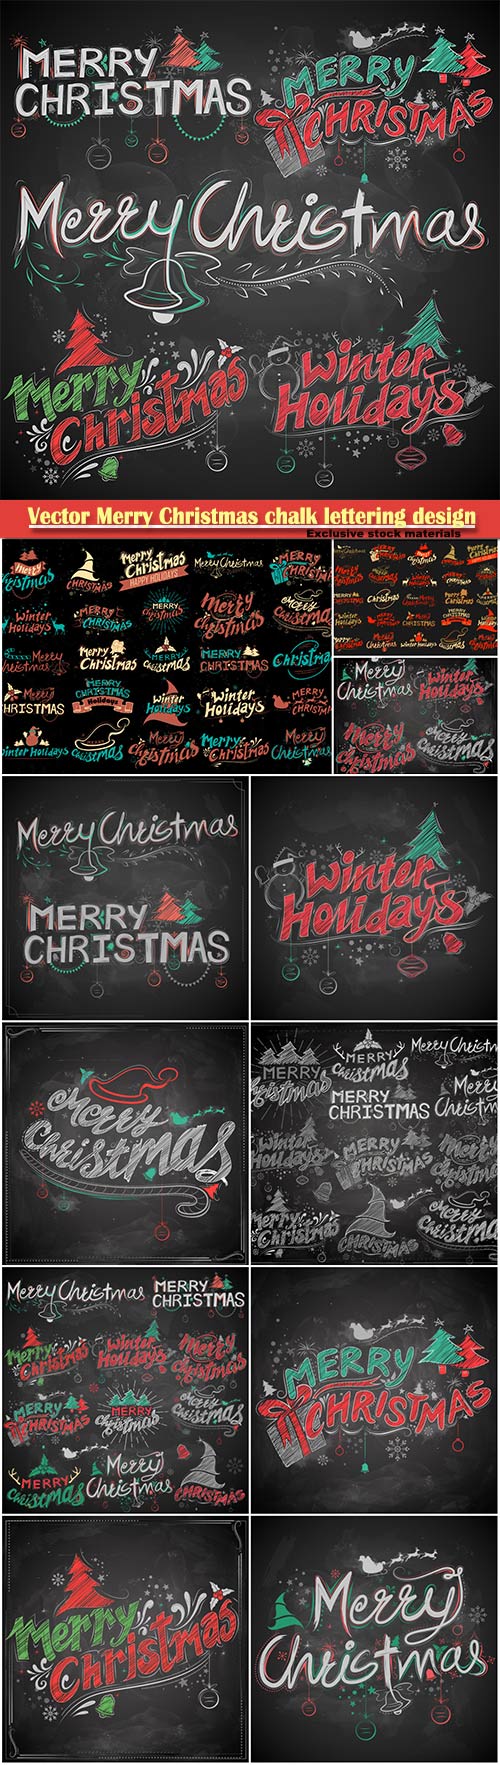 Vector Merry Christmas and winter holiday chalk lettering design